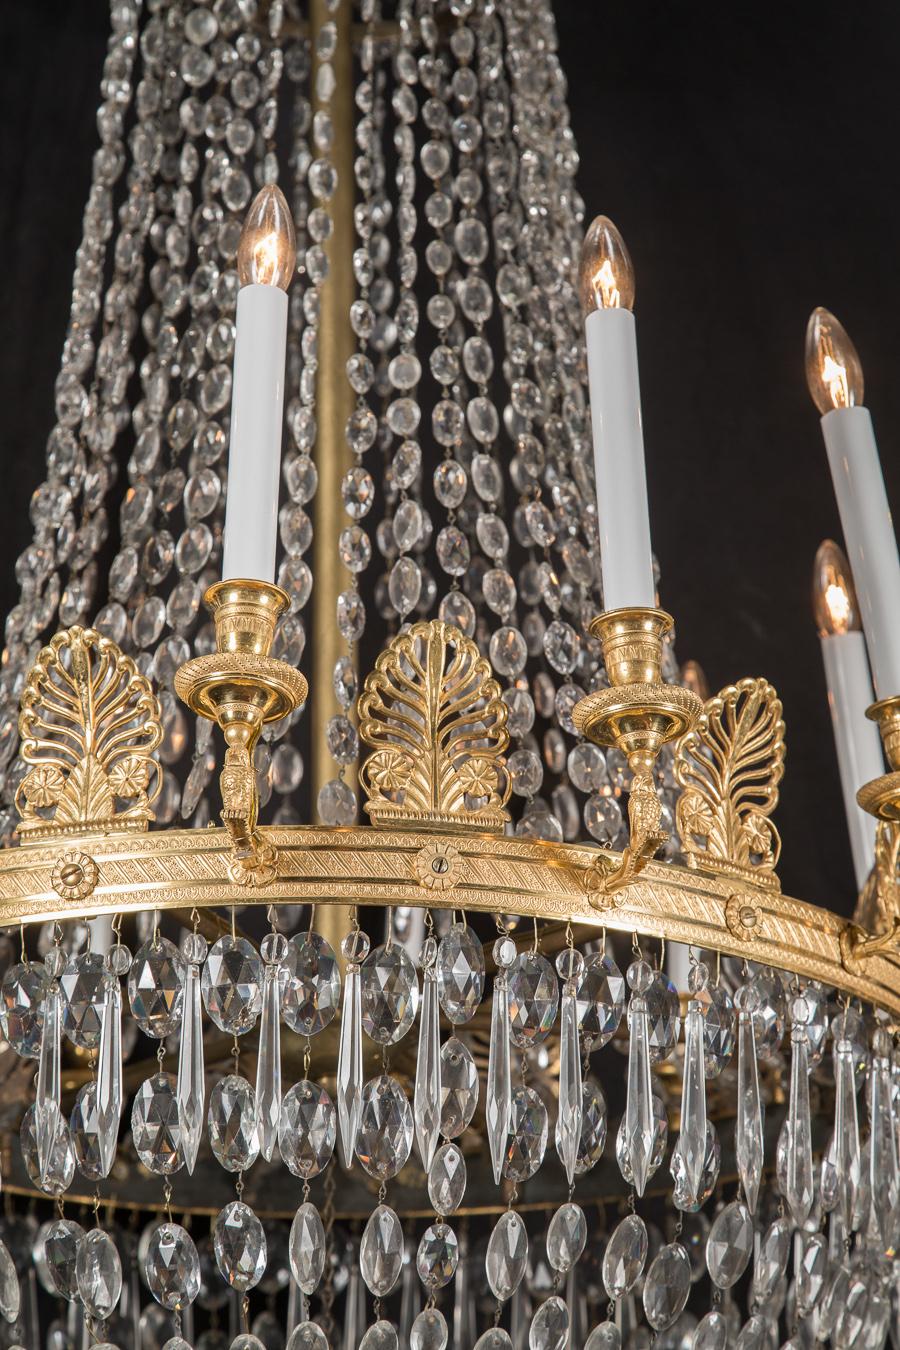 This French Empire chandelier features beautiful bronze accompanied by a plethora of crystals, and dates to the 19th century. Note the oval cut crystals graduating in size from the top to the center ring, the pointed crystals draped at center, below